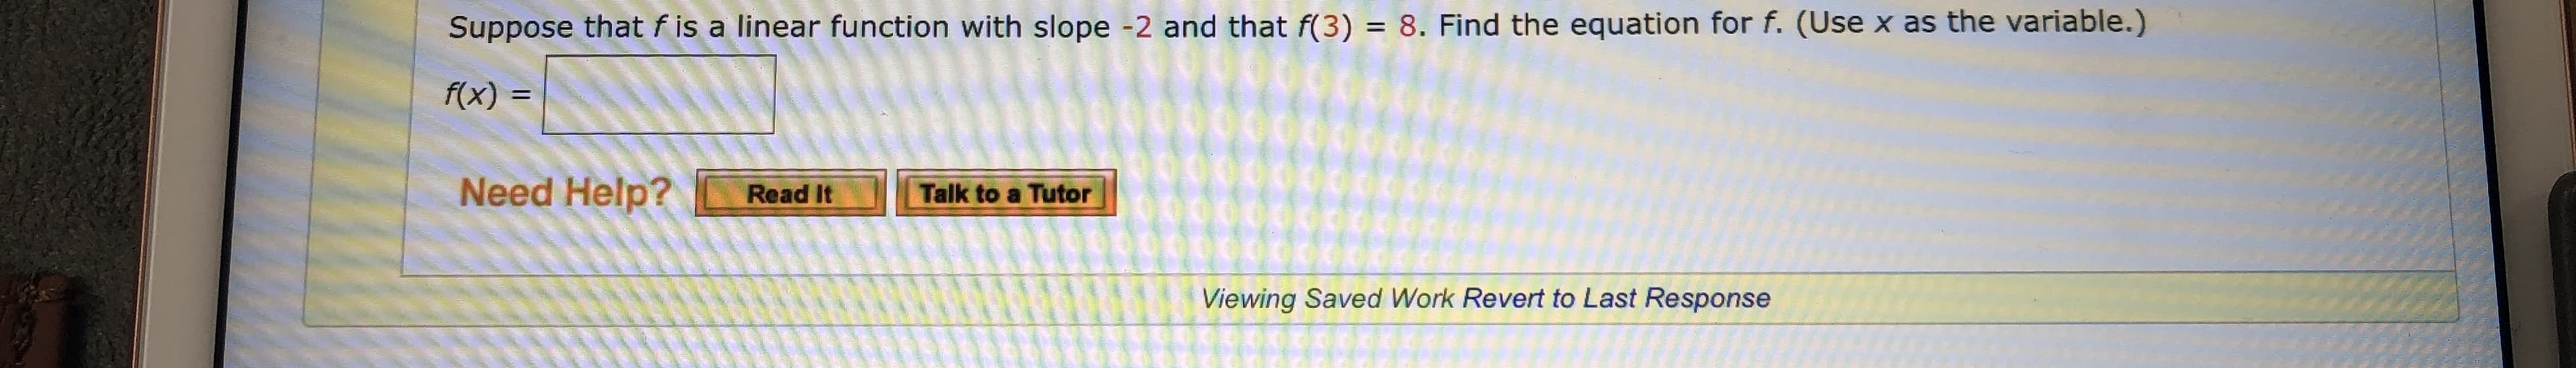 Suppose that f is a linear function with slope -2 and that f(3) = 8. Find the equation for f. (Use x as the variable.)
f(x)
pooG
Need Help?
Talk to a Tutor
Read It
Viewing Saved Work Revert to Last Response
